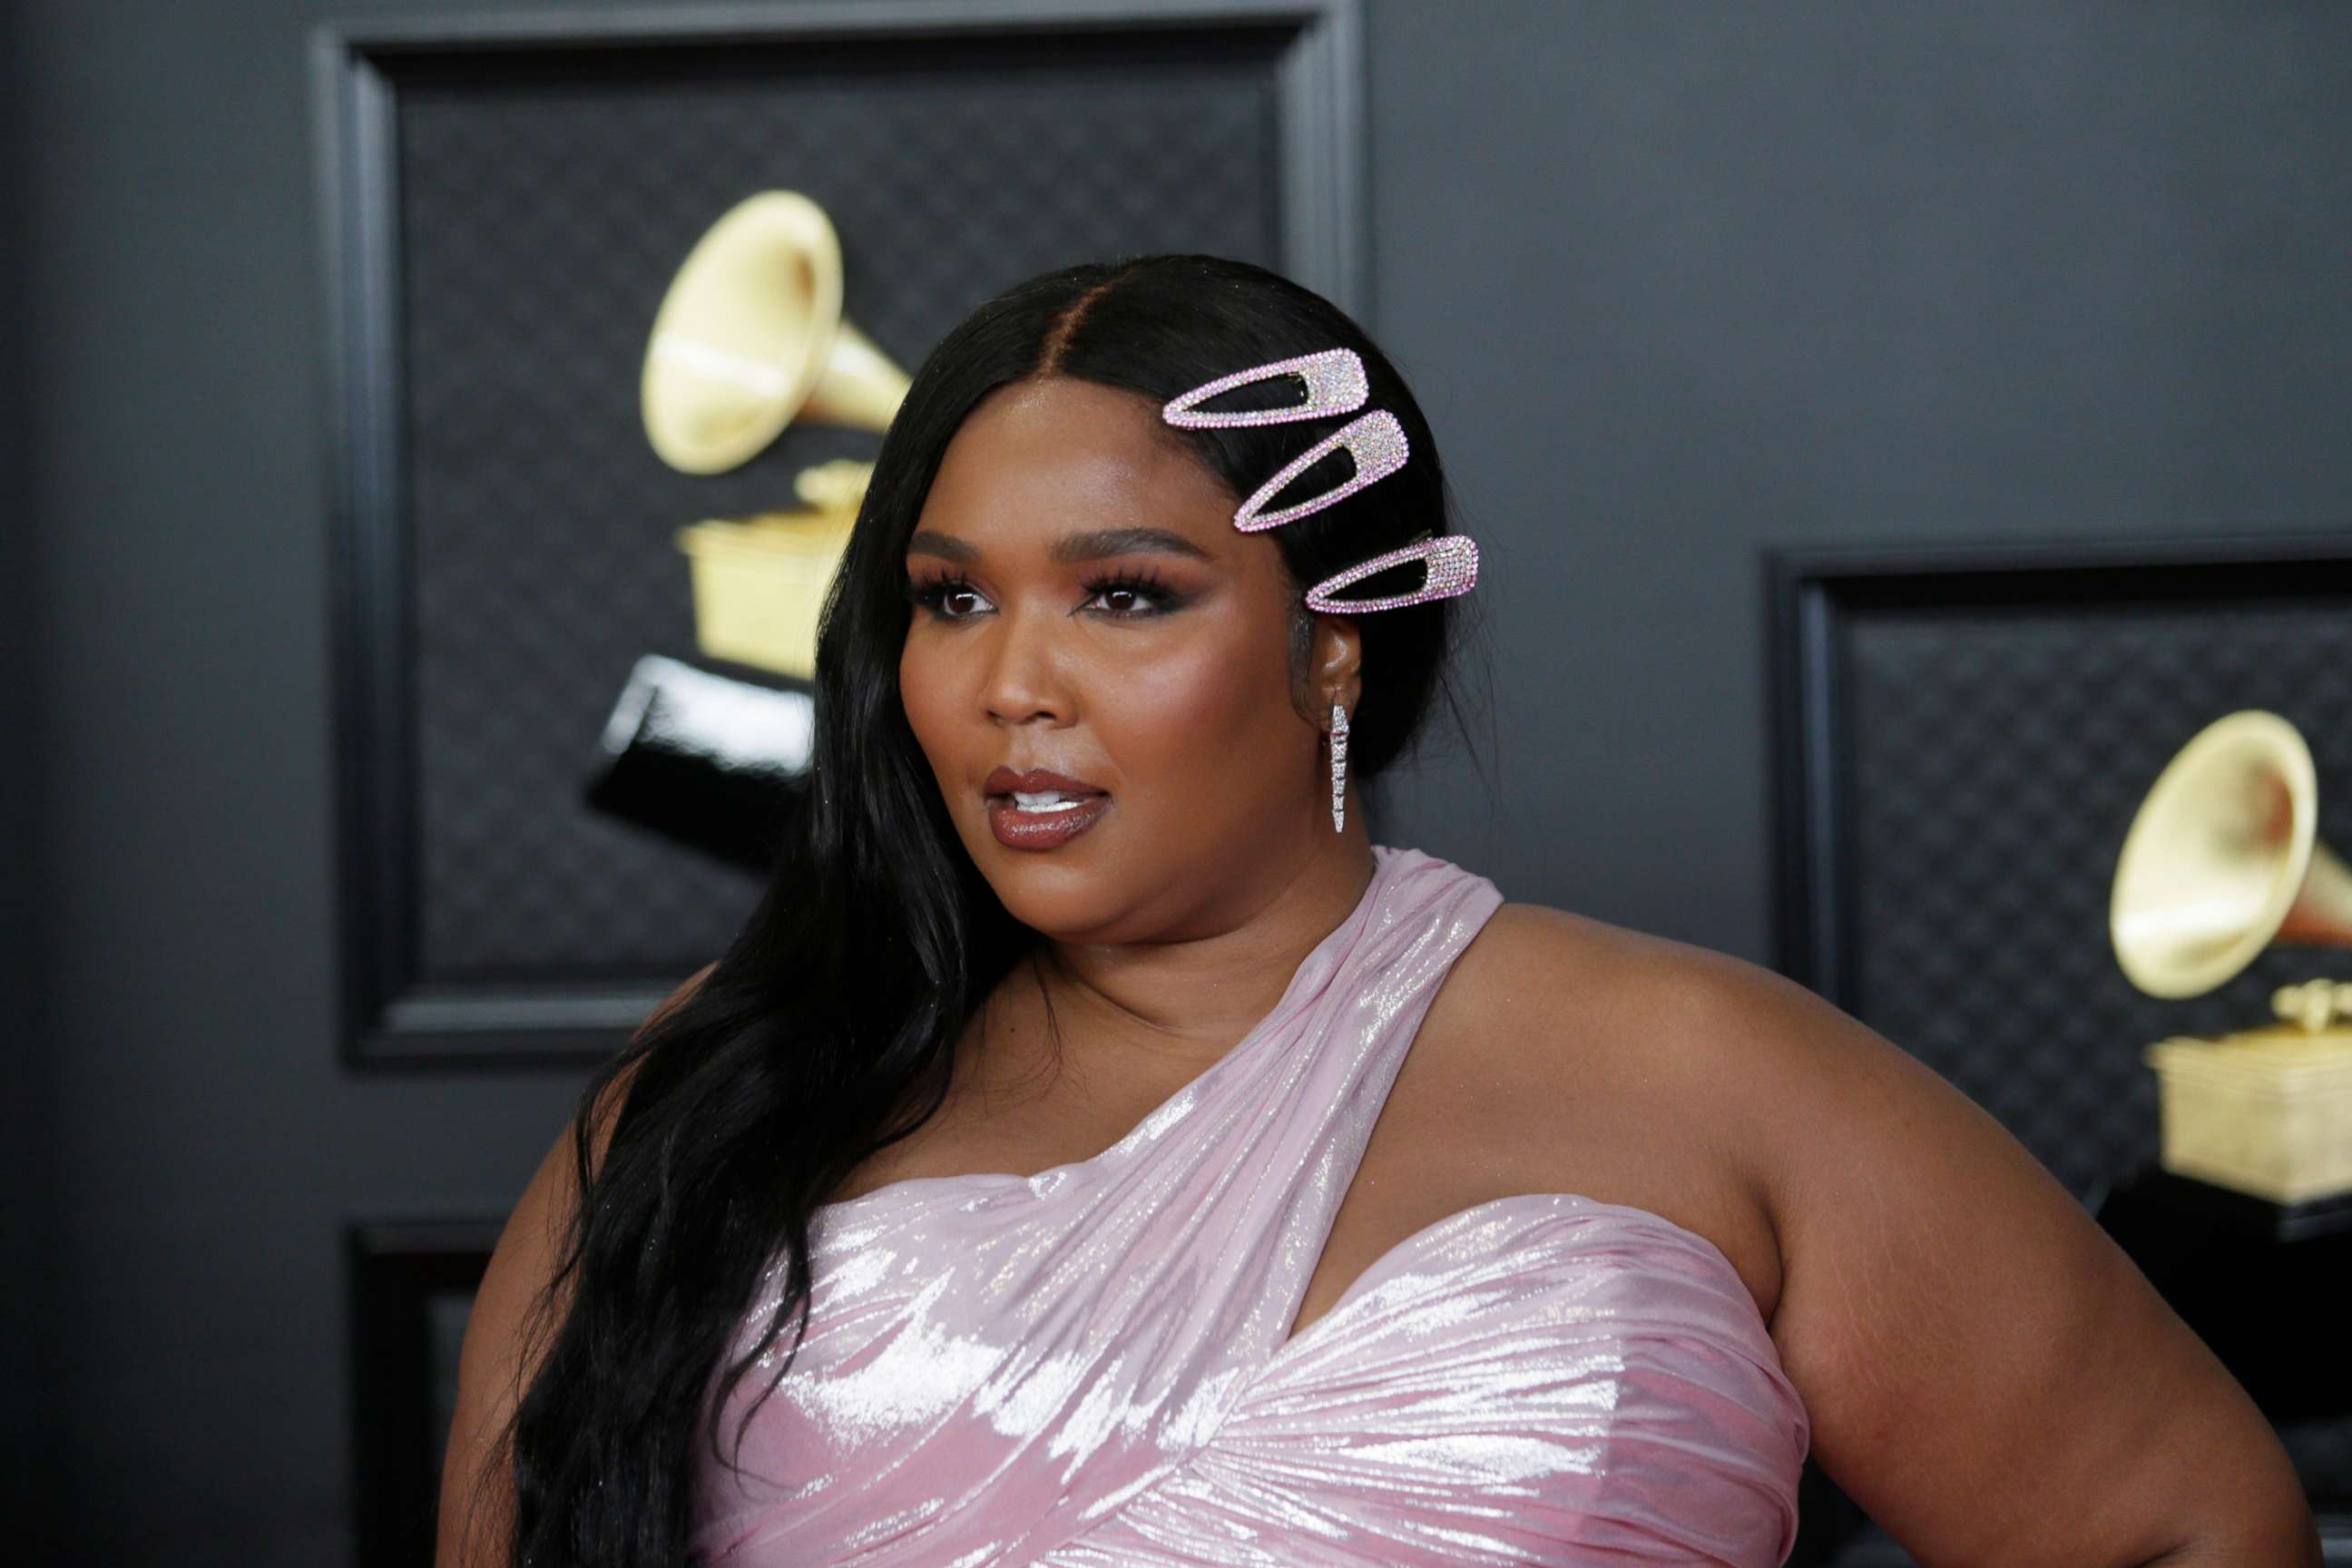 10 Things We Learned From 'Love, Lizzo